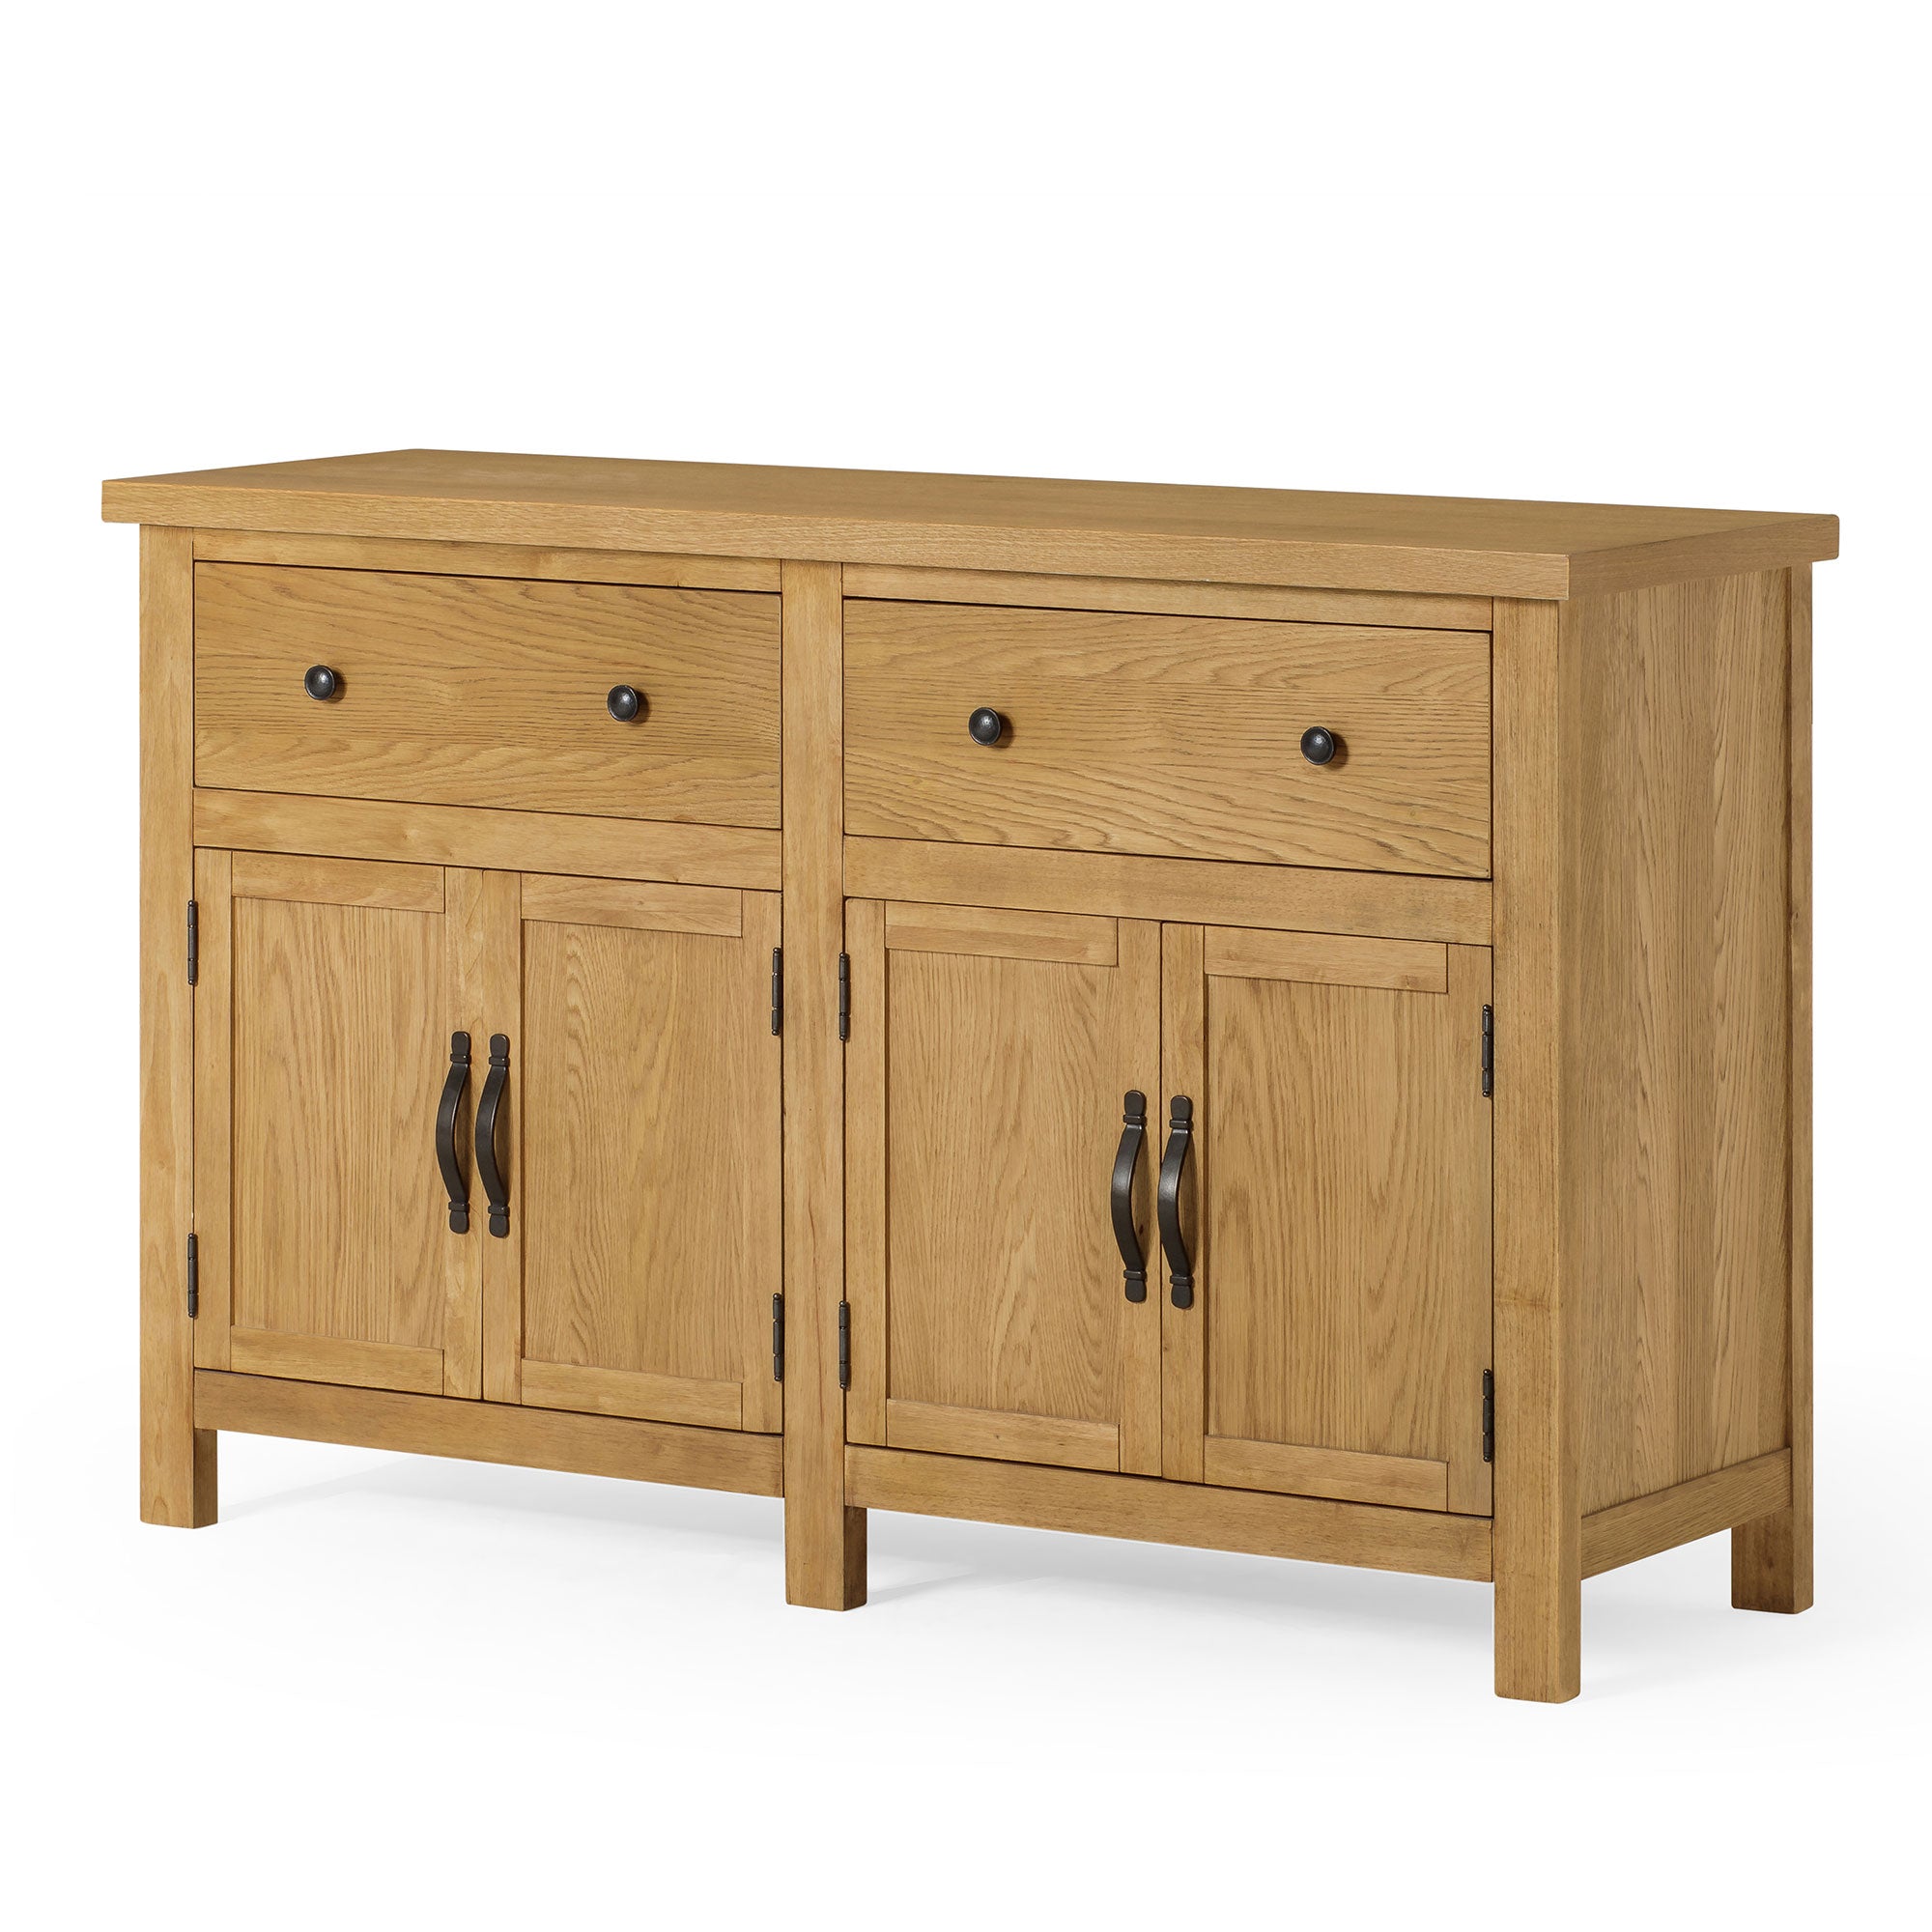 Felix Organic Wooden Sideboard in Weathered Natural Finish in Cabinets by Maven Lane